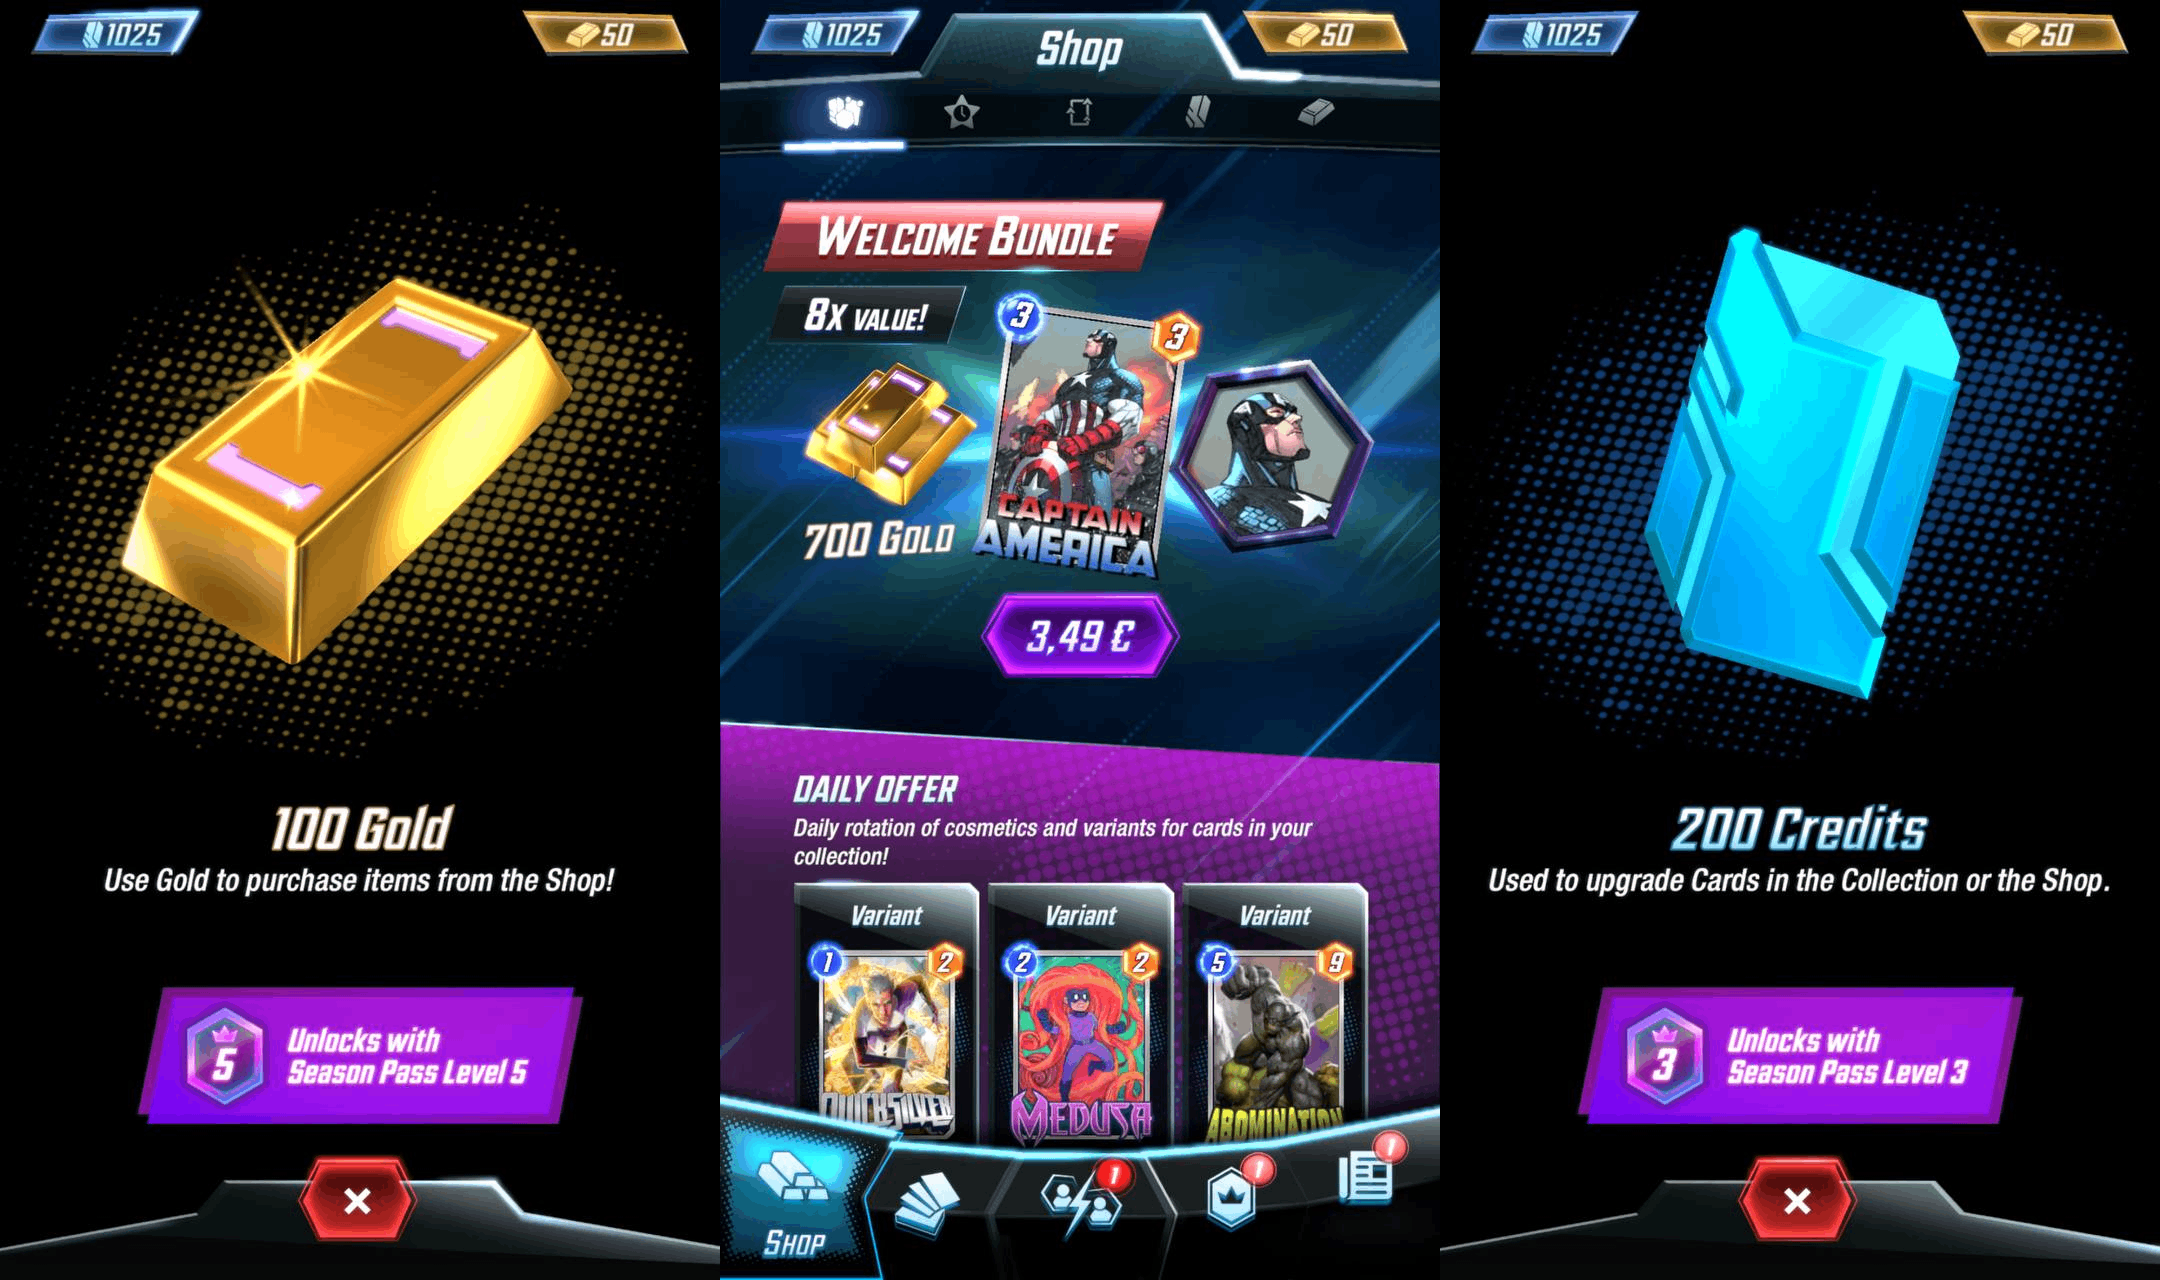 Three Marvel Snap screenshots showing the 100 Gold in level 5, the Welcome Bundle and the 200 Credits in level 3